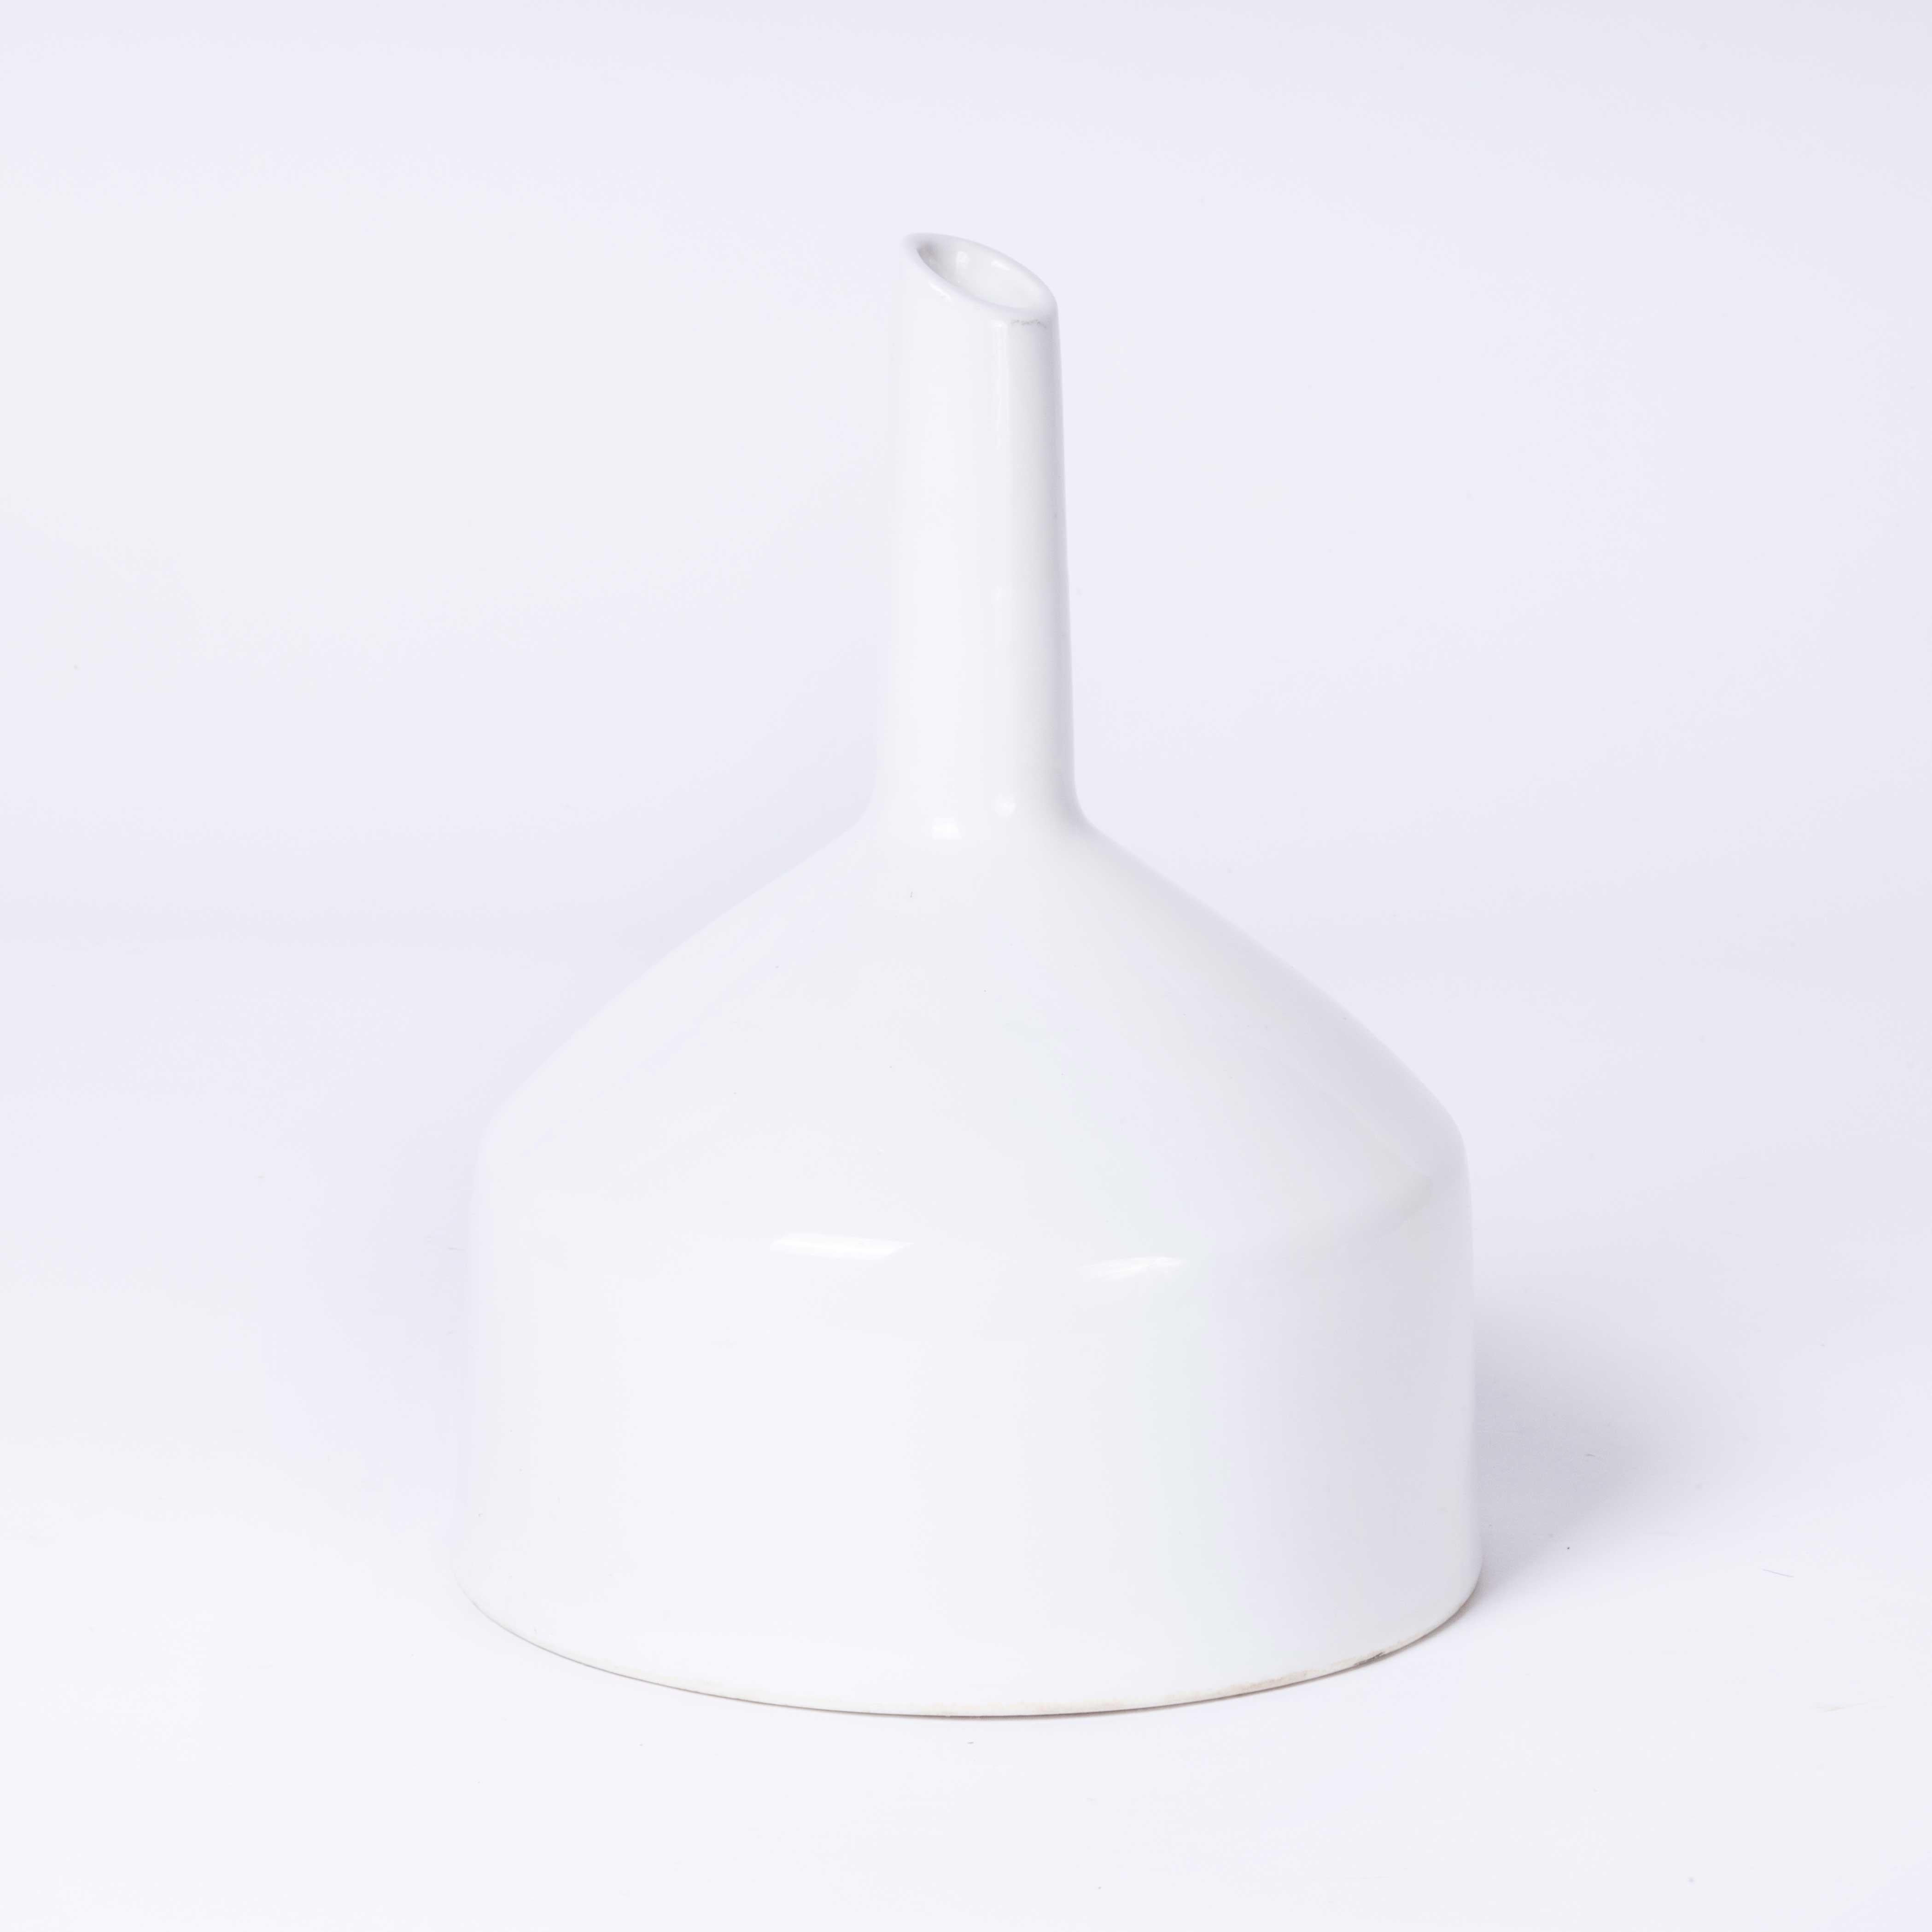 Heavy Ceramic white funnel – new old stock
Heavy Ceramic white funnel – new old stock. Excellent condition.

Workshop report
Our workshop team inspect every product and carry out any needed repairs to ensure that everything leaves us serviced